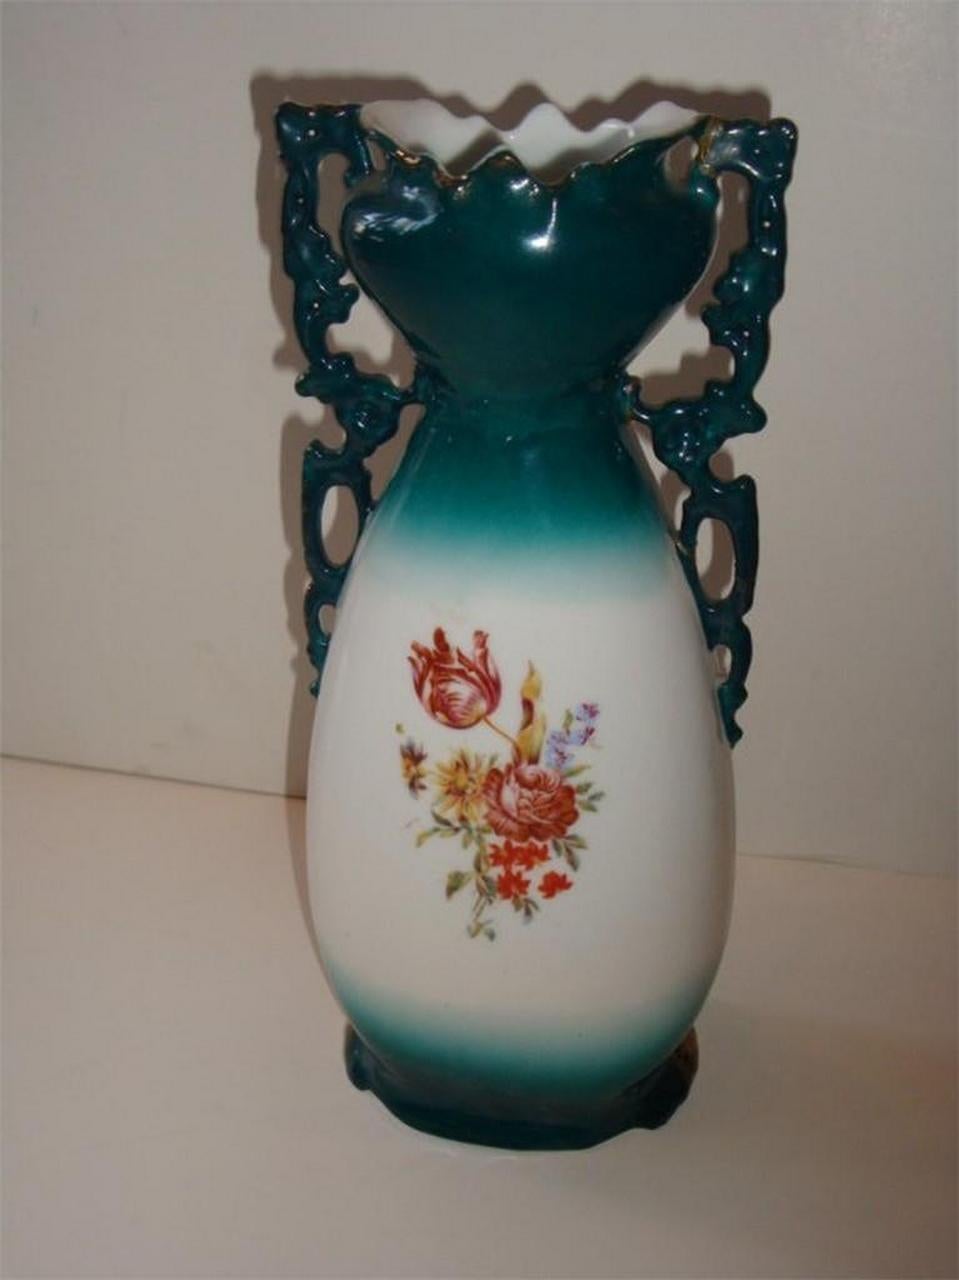  Exquisite 19th Century Austrian Royal Vienna Kaufmann Vase with Women Outdoors  In Good Condition For Sale In New York, NY